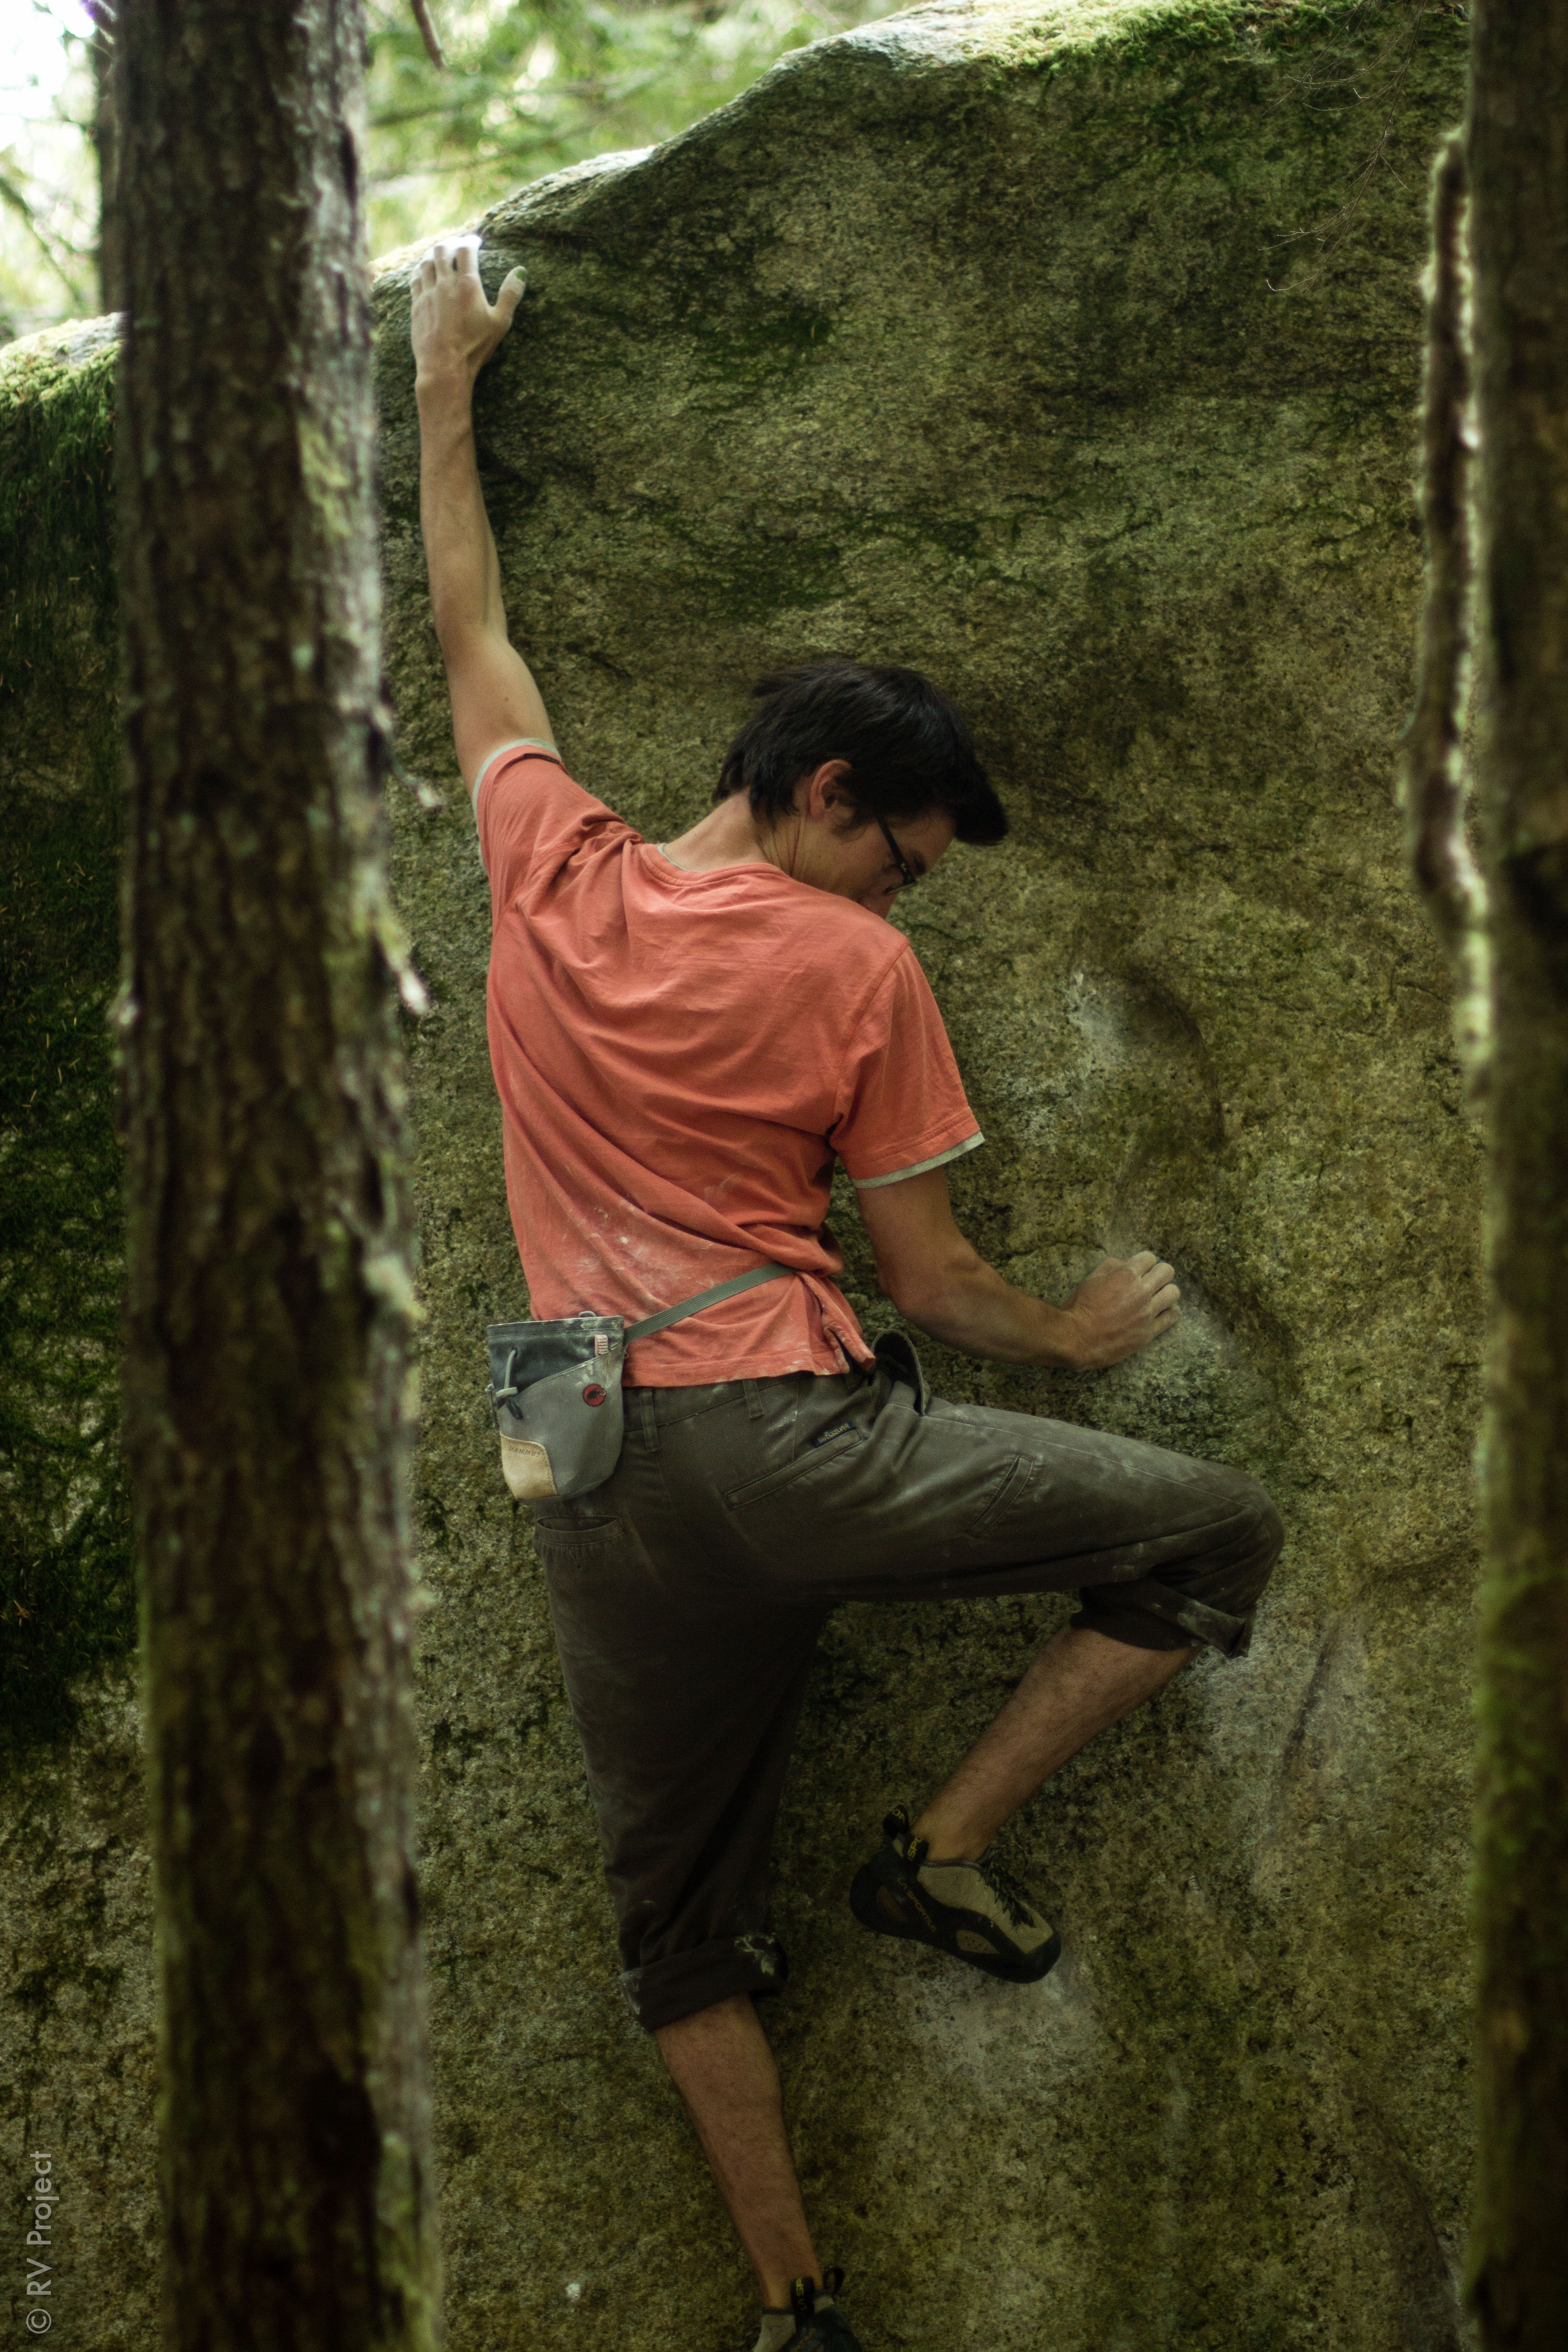 Eric Bissel overcoming the slick, polished holds to send Wormworld (V6).